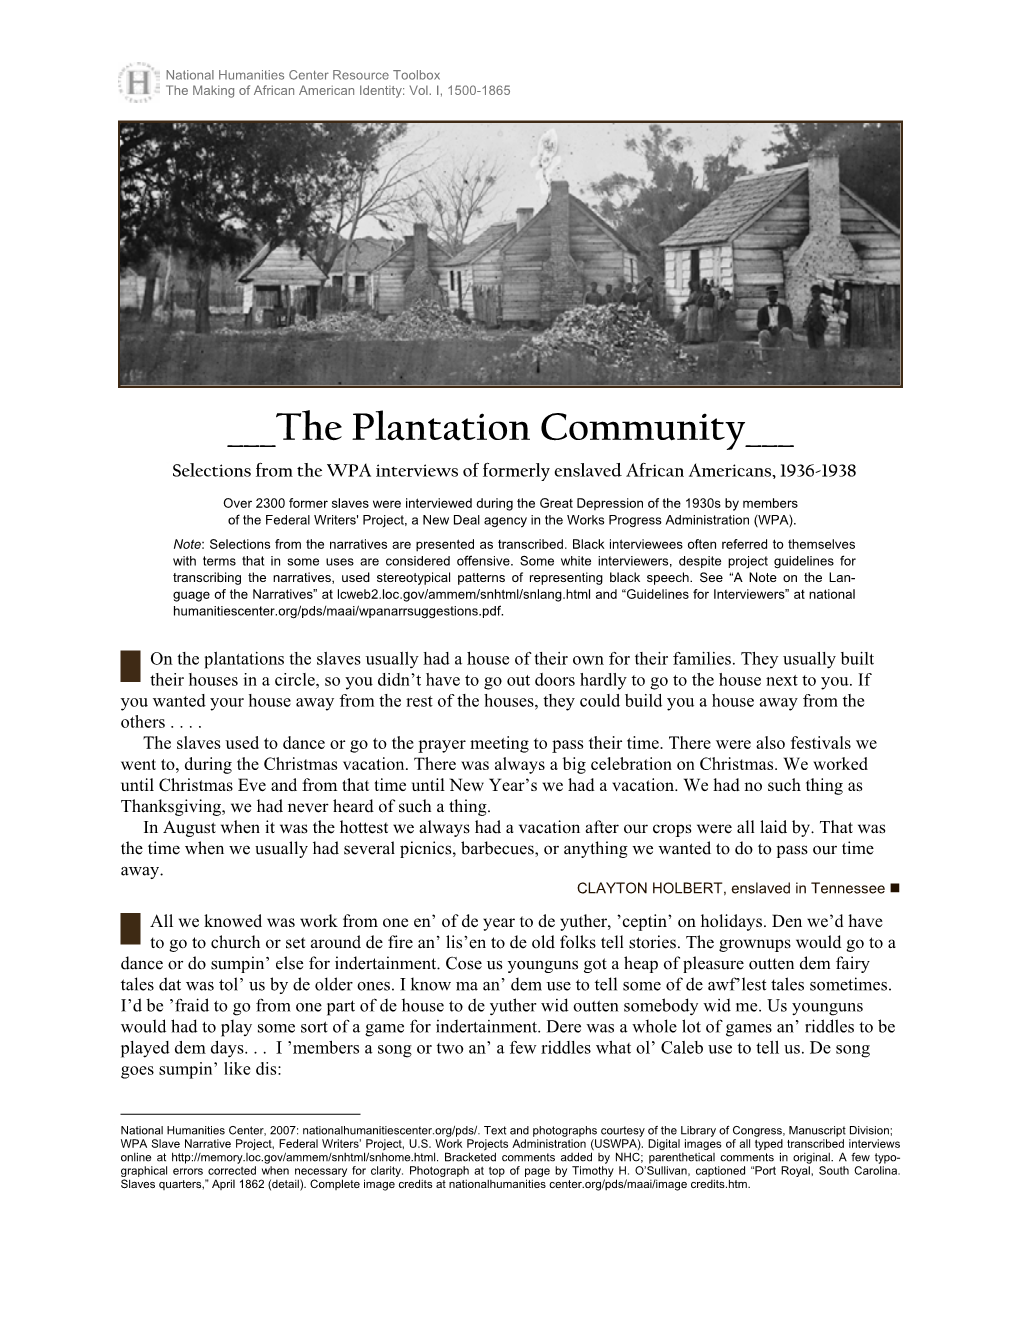 The Plantation Community, Selections from WPA Narratives, 1936-1938